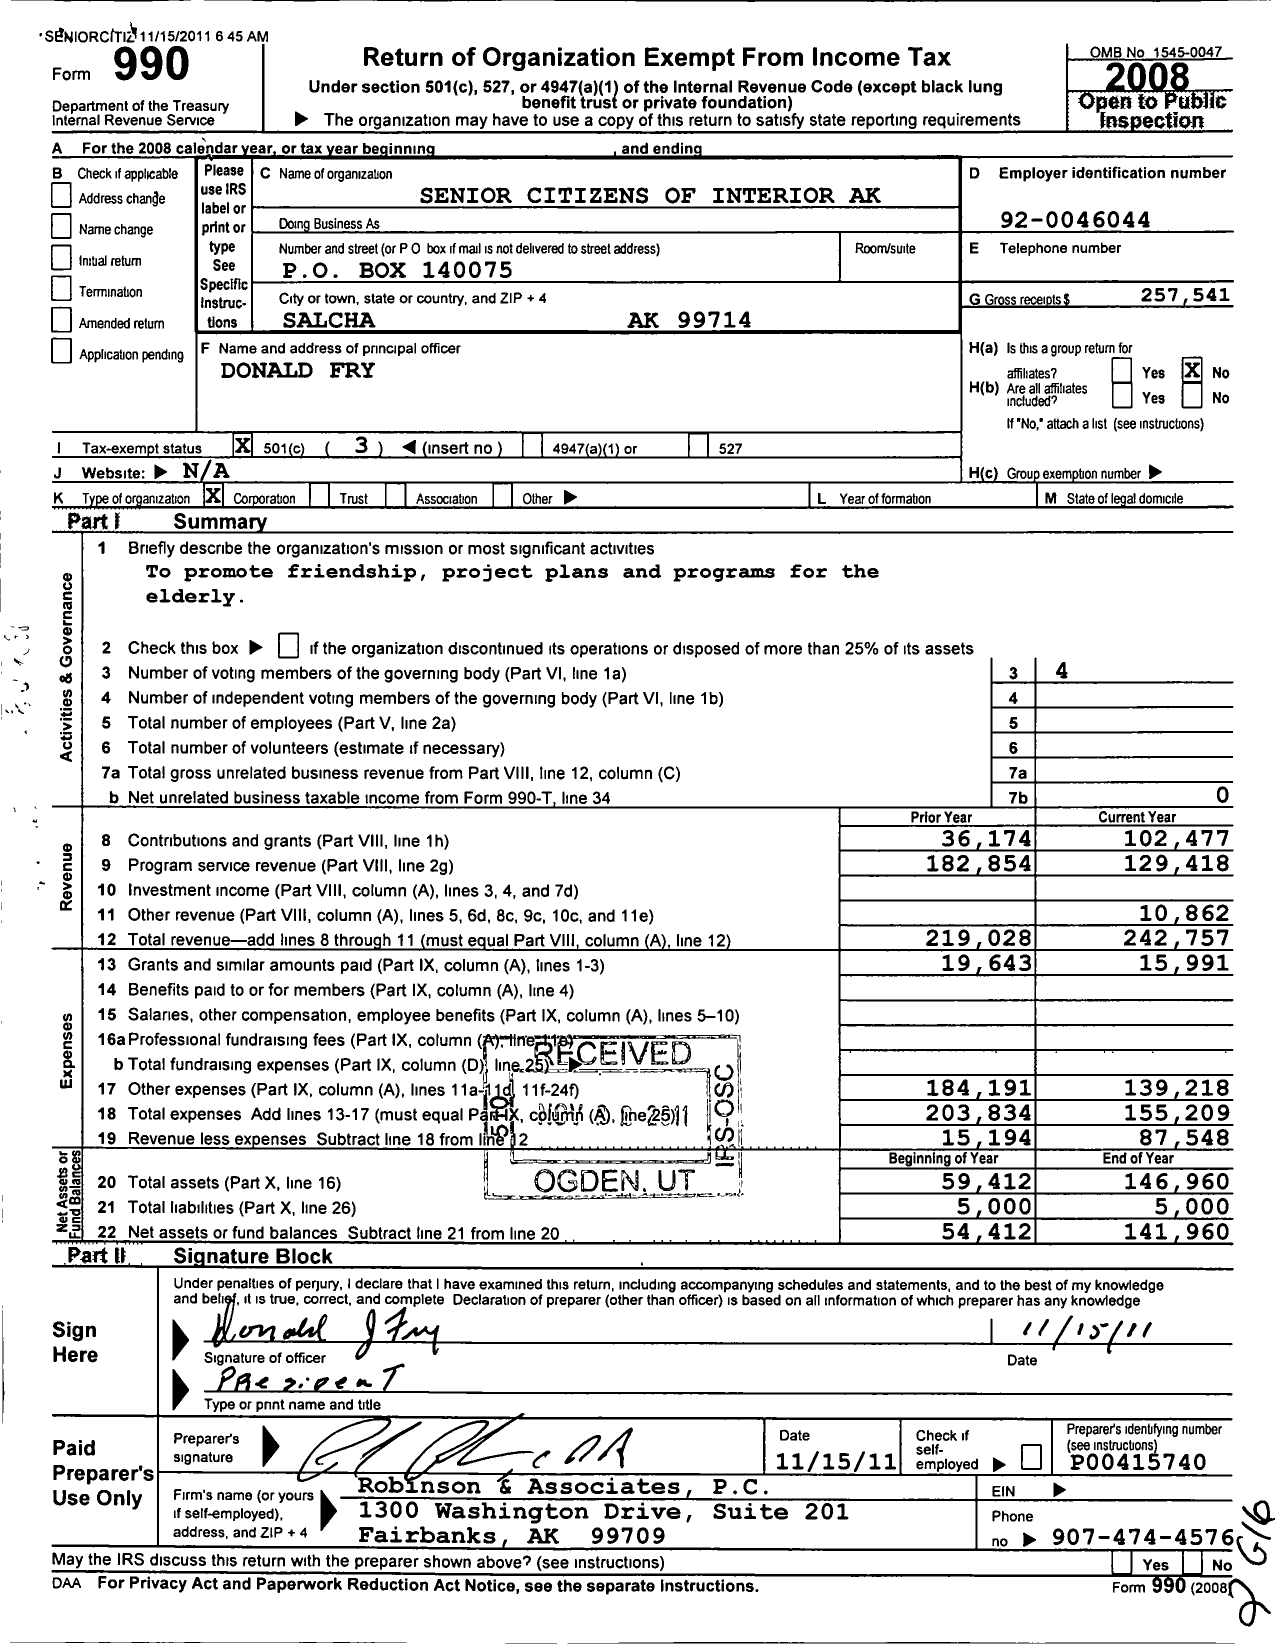 Image of first page of 2008 Form 990 for Senior Citizens of Interior Ak